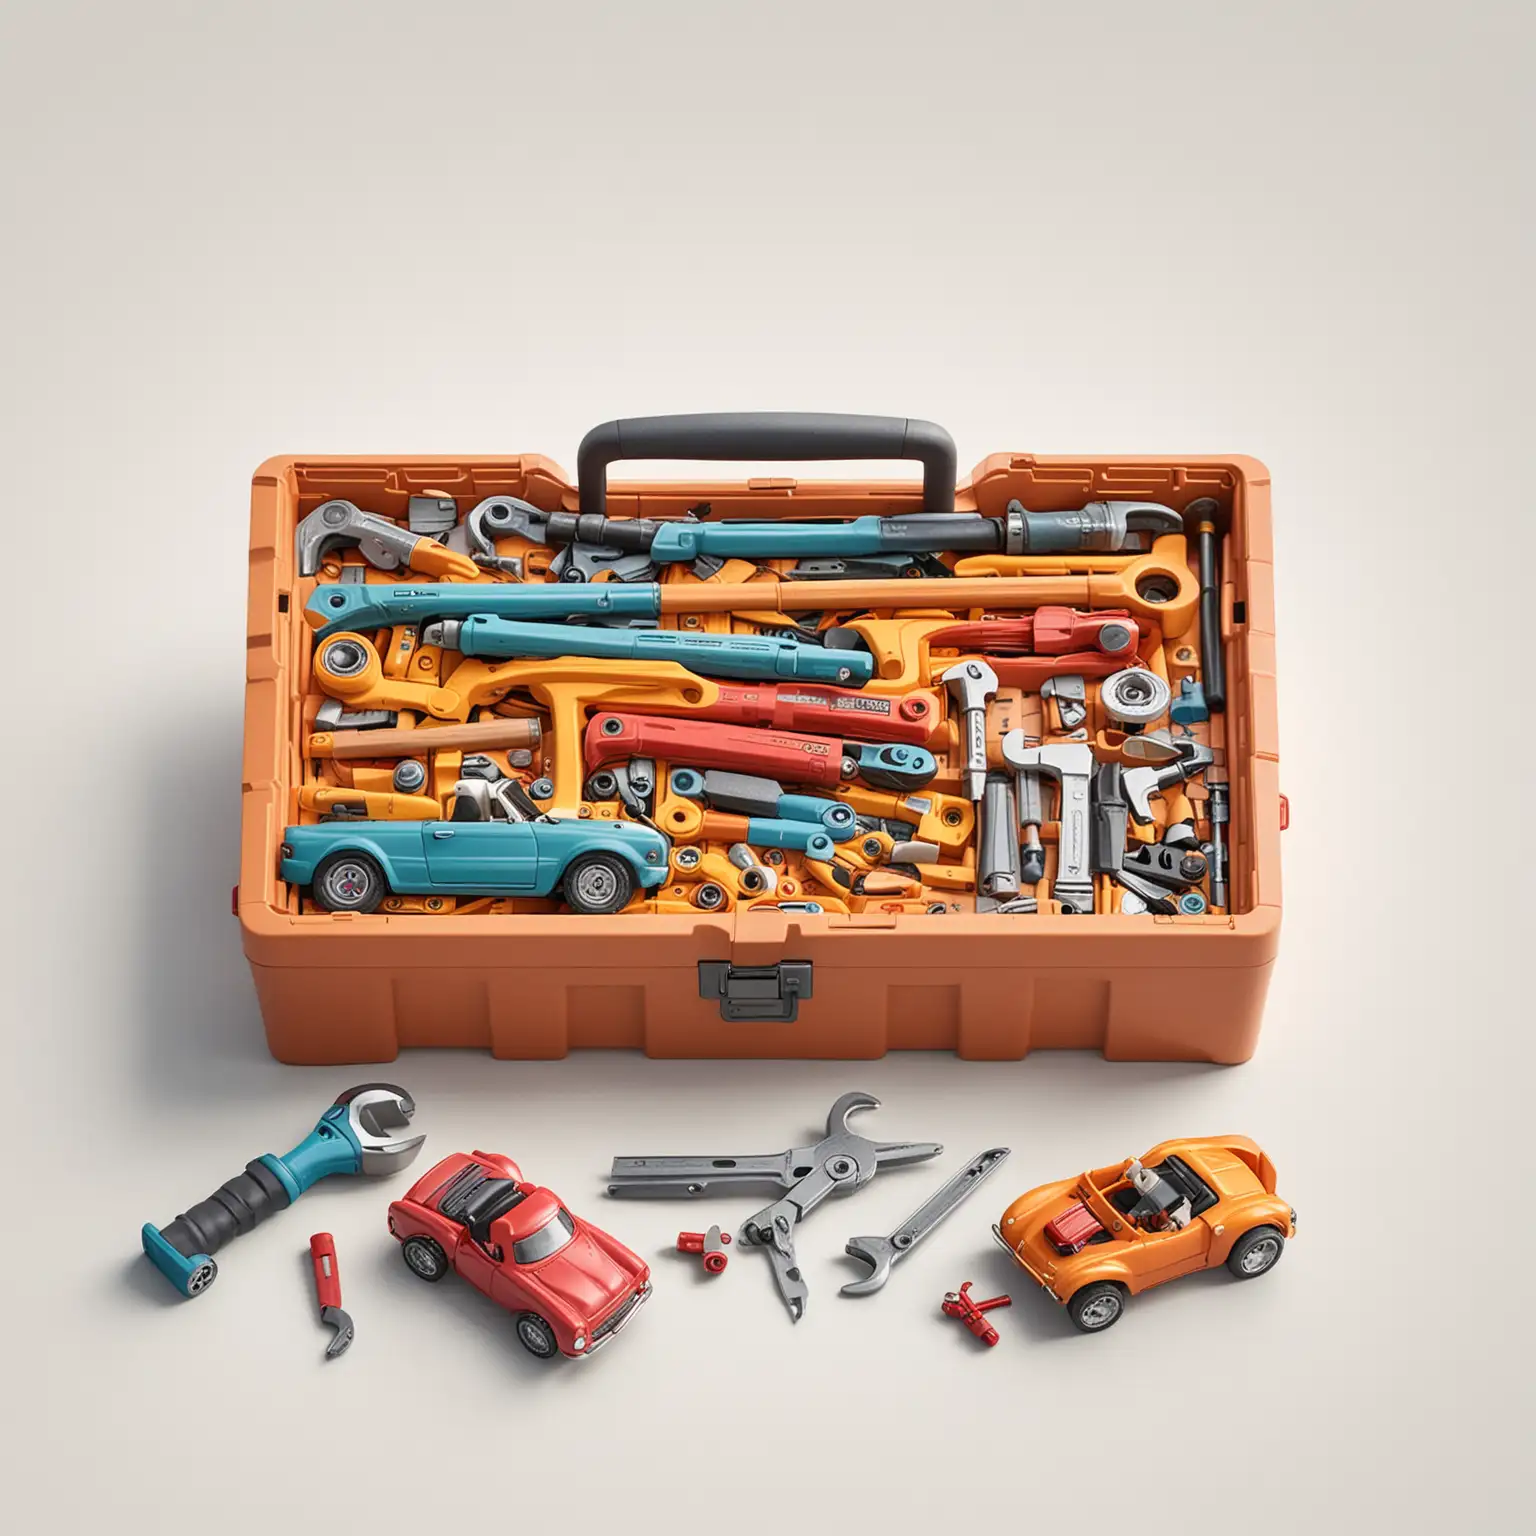 Create an image of colourful, modern toolbox containing tools and little cars. Pixar style, white background